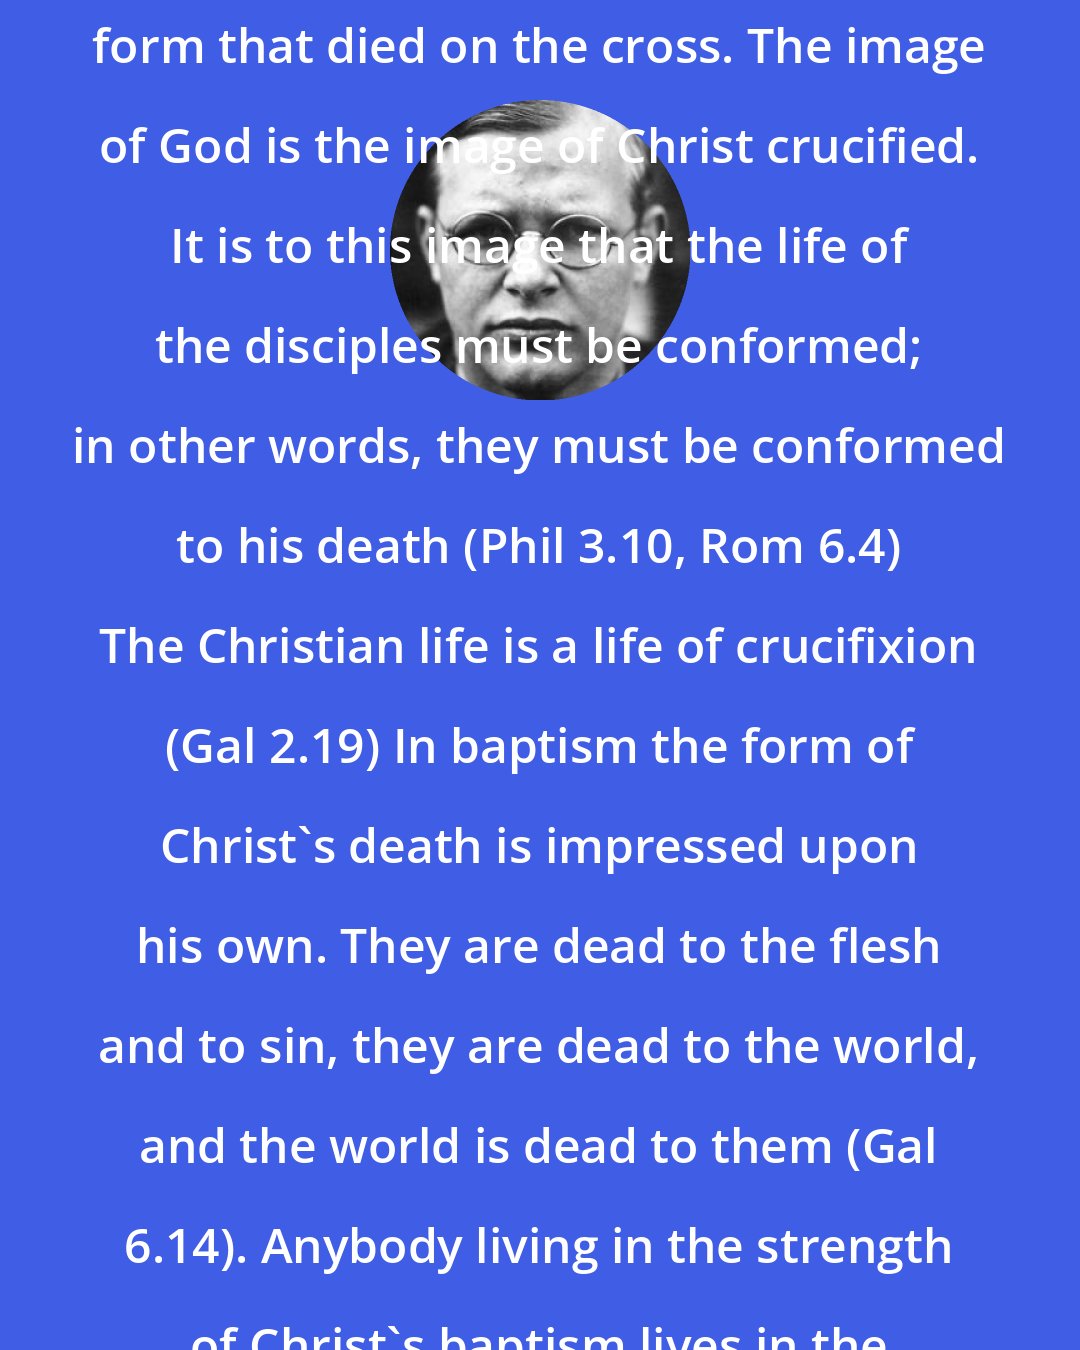 Dietrich Bonhoeffer: The earthly form of Christ is the form that died on the cross. The image of God is the image of Christ crucified. It is to this image that the life of the disciples must be conformed; in other words, they must be conformed to his death (Phil 3.10, Rom 6.4) The Christian life is a life of crucifixion (Gal 2.19) In baptism the form of Christ's death is impressed upon his own. They are dead to the flesh and to sin, they are dead to the world, and the world is dead to them (Gal 6.14). Anybody living in the strength of Christ's baptism lives in the strength of Christ's death.